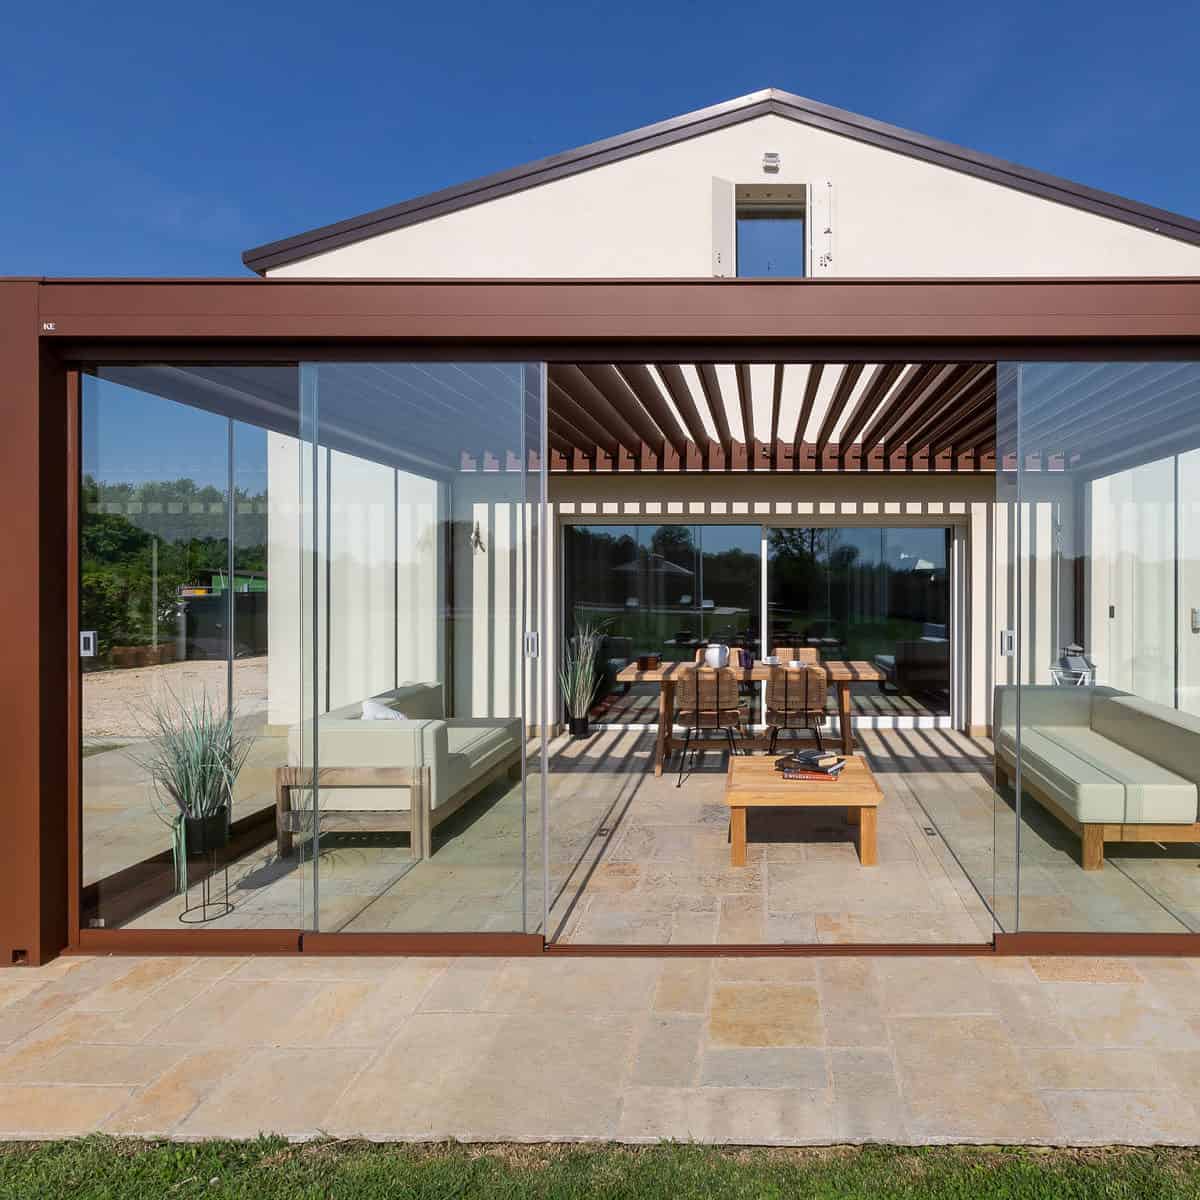 Kedry Prime rotating louvred roof in brown on wall-mounted pergola with glass sliding doors